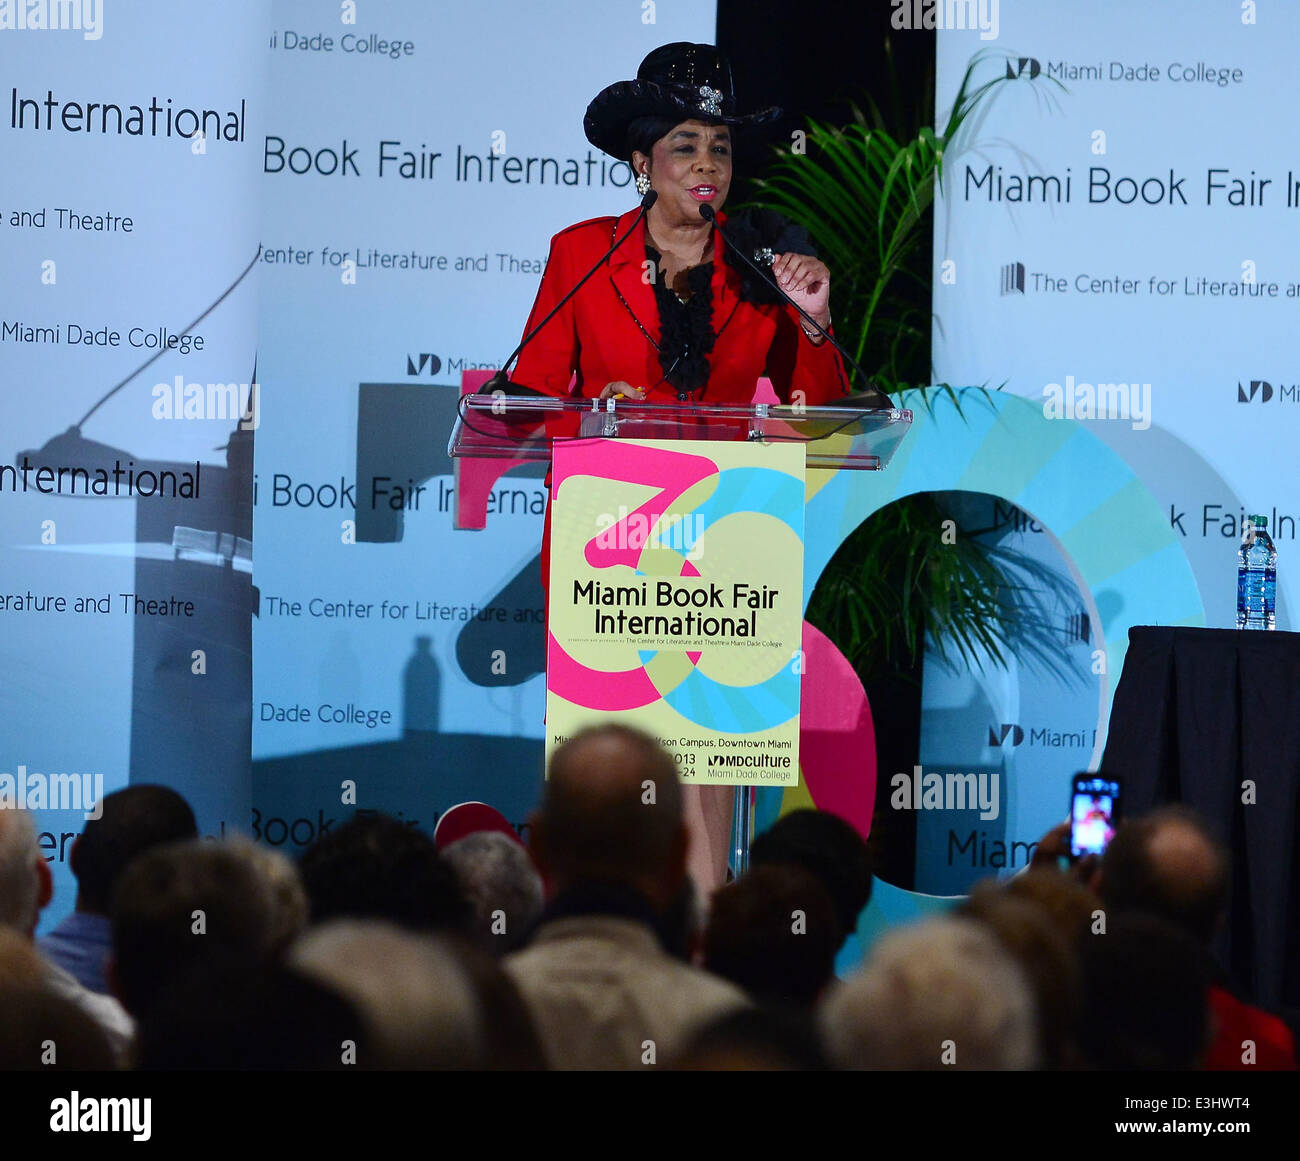 U.S. House of Representative John Lewis attends the Miami Book Fair International 2013 to promote his graphic novel 'March'  Featuring: Frederica S. Wilson Where: Miami, Florida, United States When: 22 Nov 2013 Stock Photo